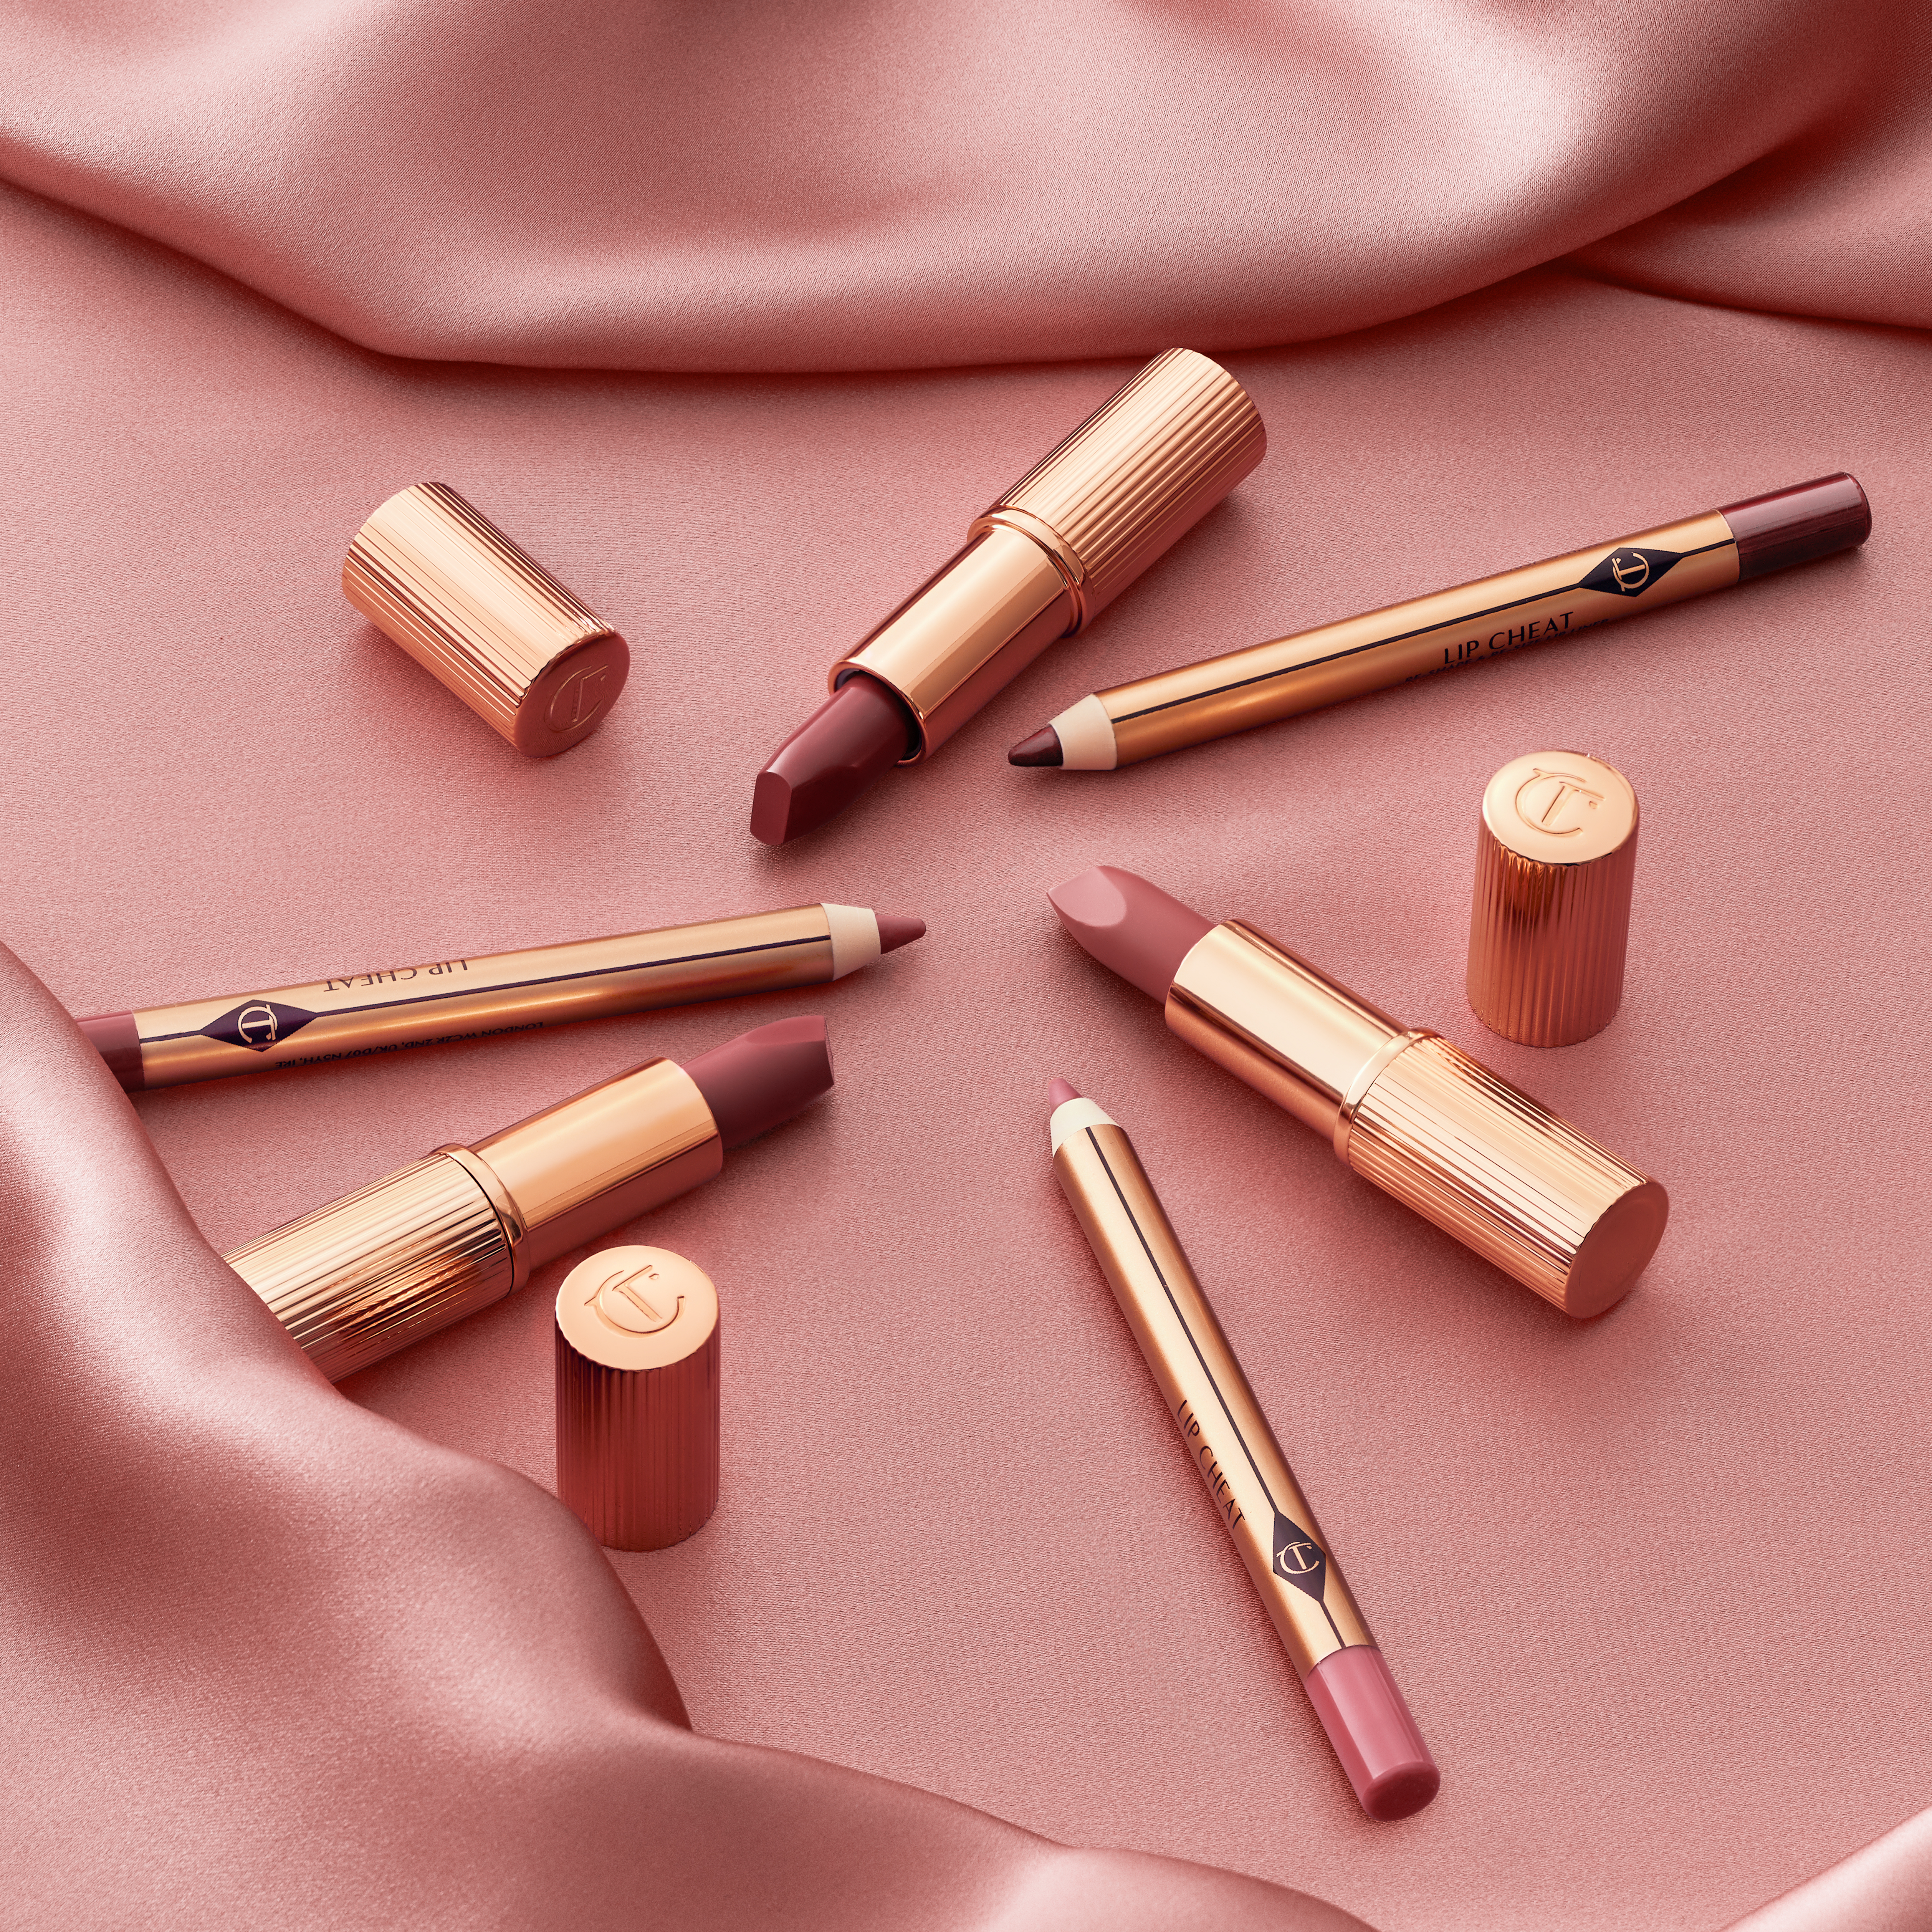 Charlotte's iconic Pillow Talk lip products available as portable, lip-perfecting minis